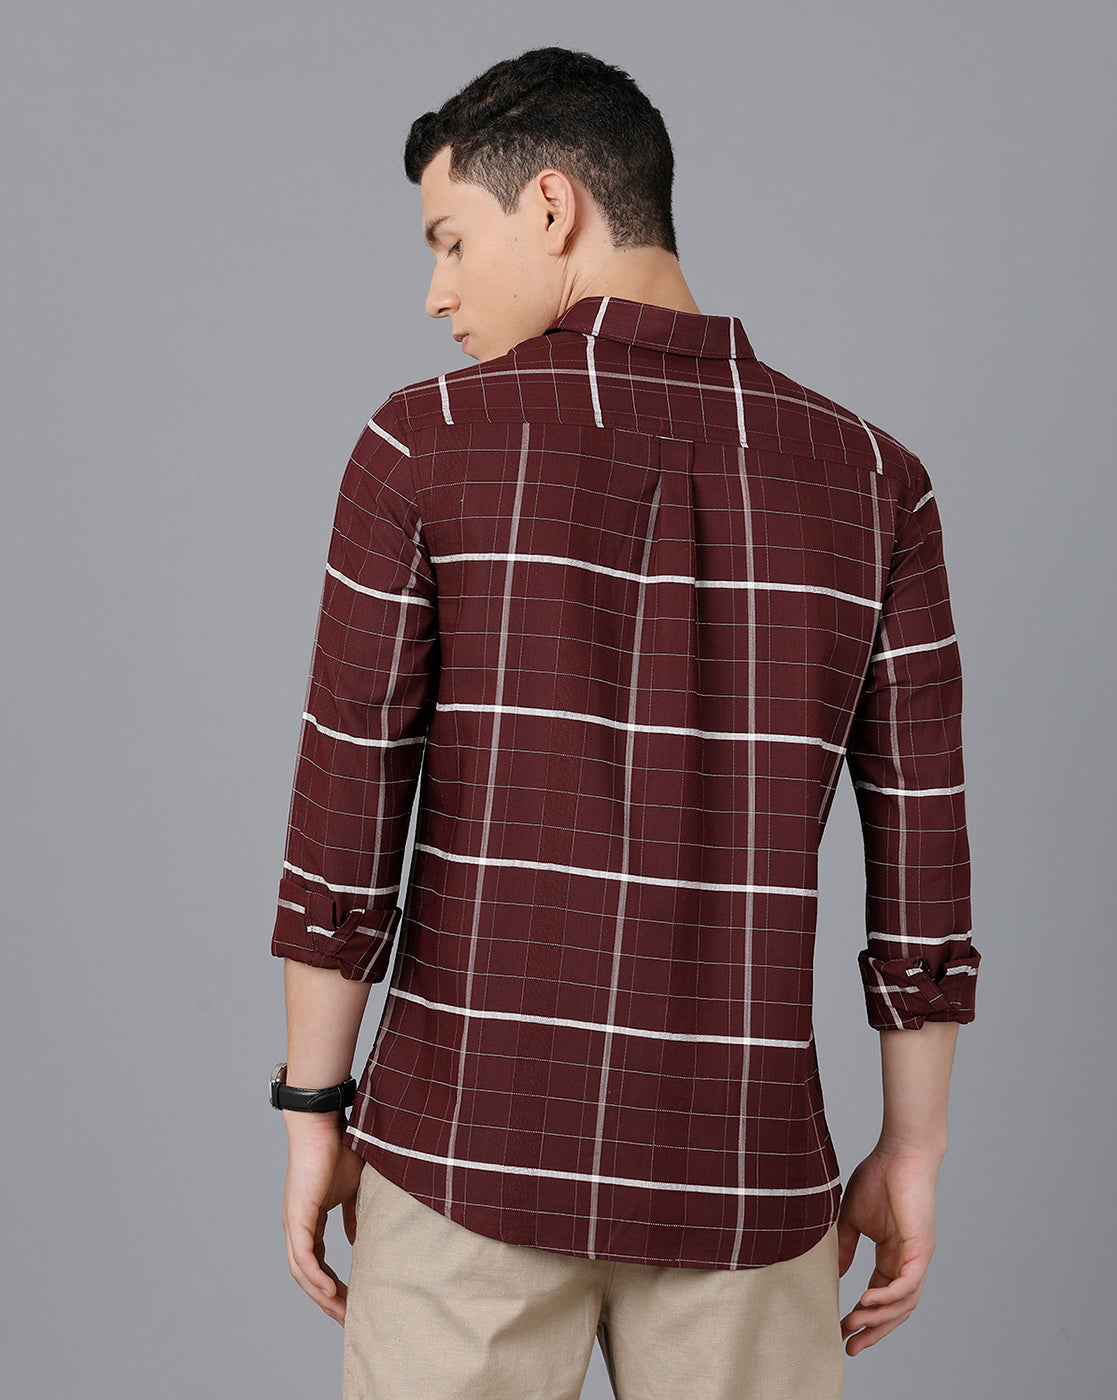 Classic Polo Mens Cotton Full Sleeve Checked Slim Fit Maroon Color Spread Collar Woven Shirt | Sn2-117 A